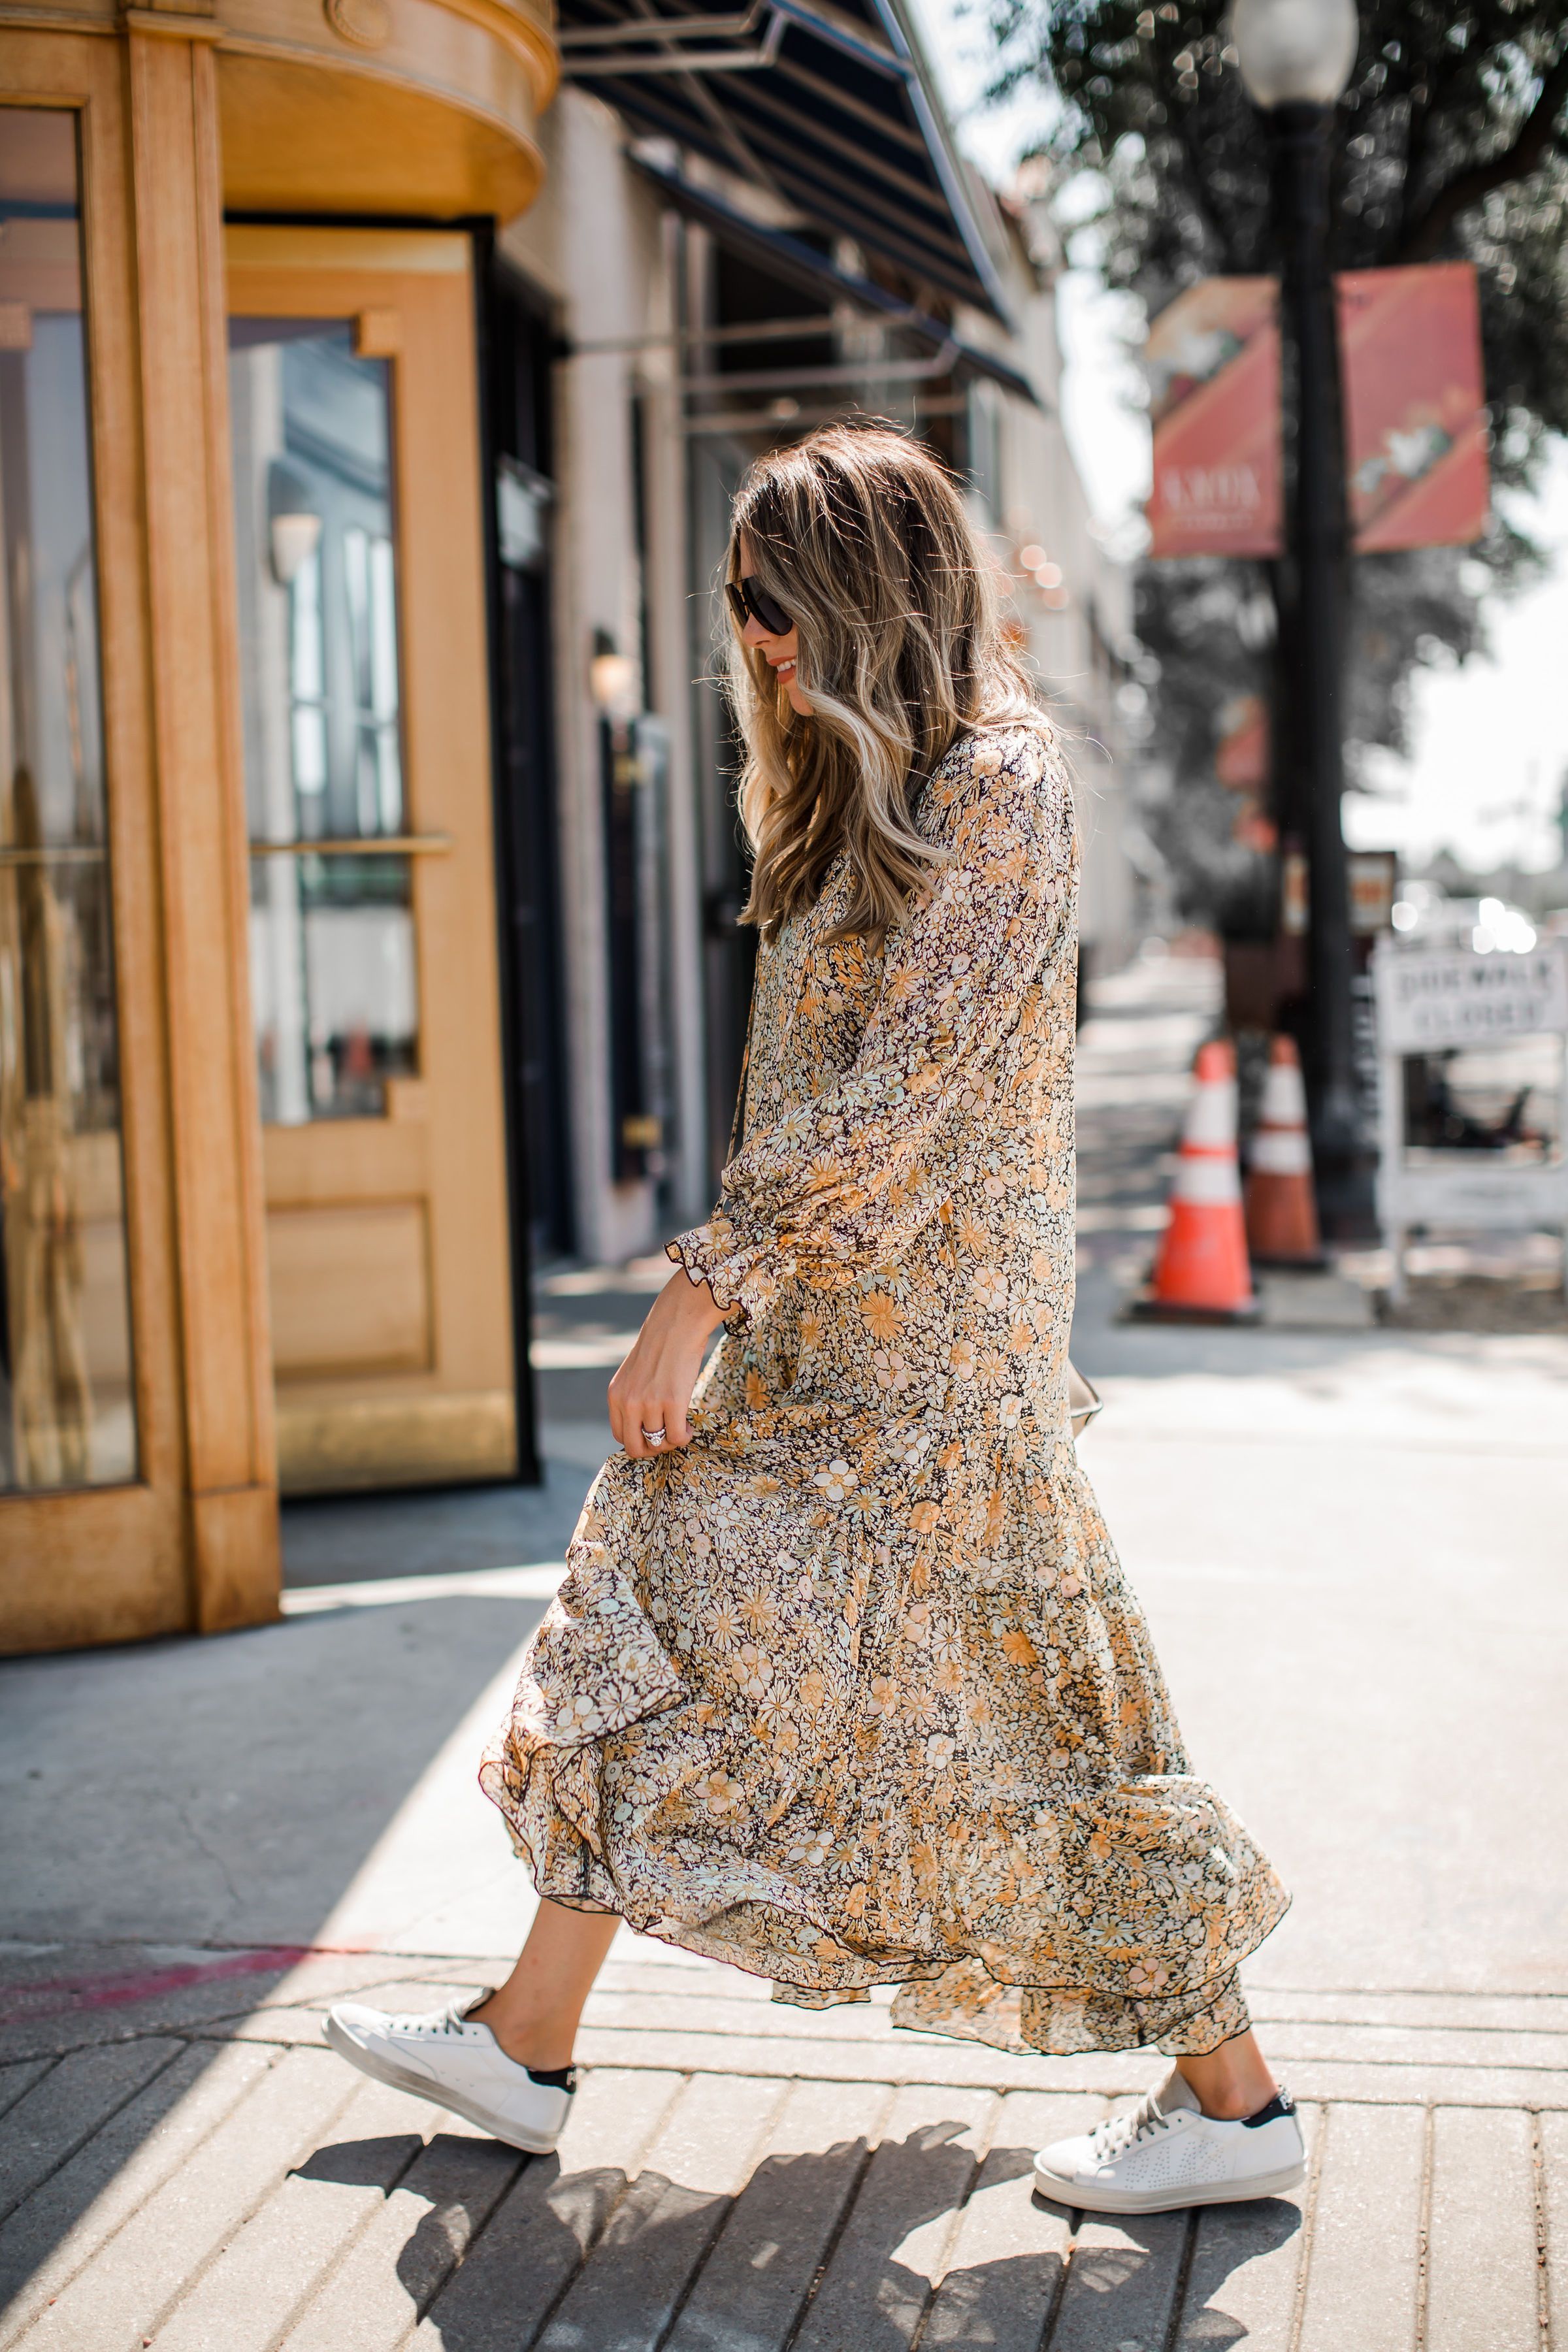 Fall Shopping: 10 Maxi Dresses to Pair with Sneakers | The Teacher Diva: a Dallas Fashion Blog featuring Beauty & Lifestyle - Fall Shopping: 10 Maxi Dresses to Pair with Sneakers | The Teacher Diva: a Dallas Fashion Blog featuring Beauty & Lifestyle -   21 style Dress with sneakers ideas